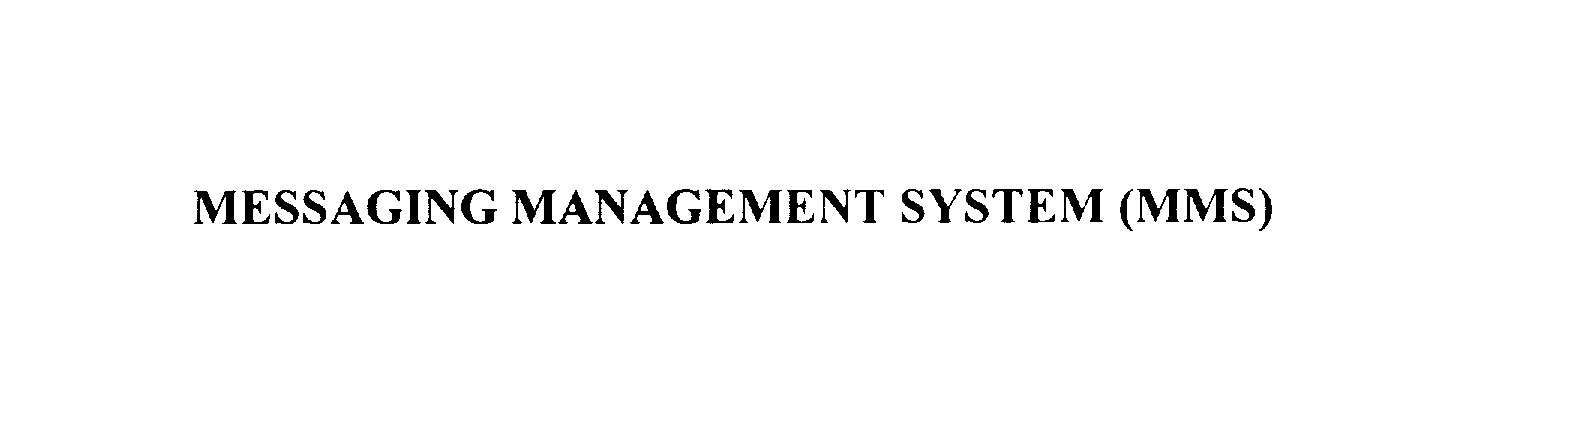  MESSAGING MANAGEMENT SYSTEM (MMS)